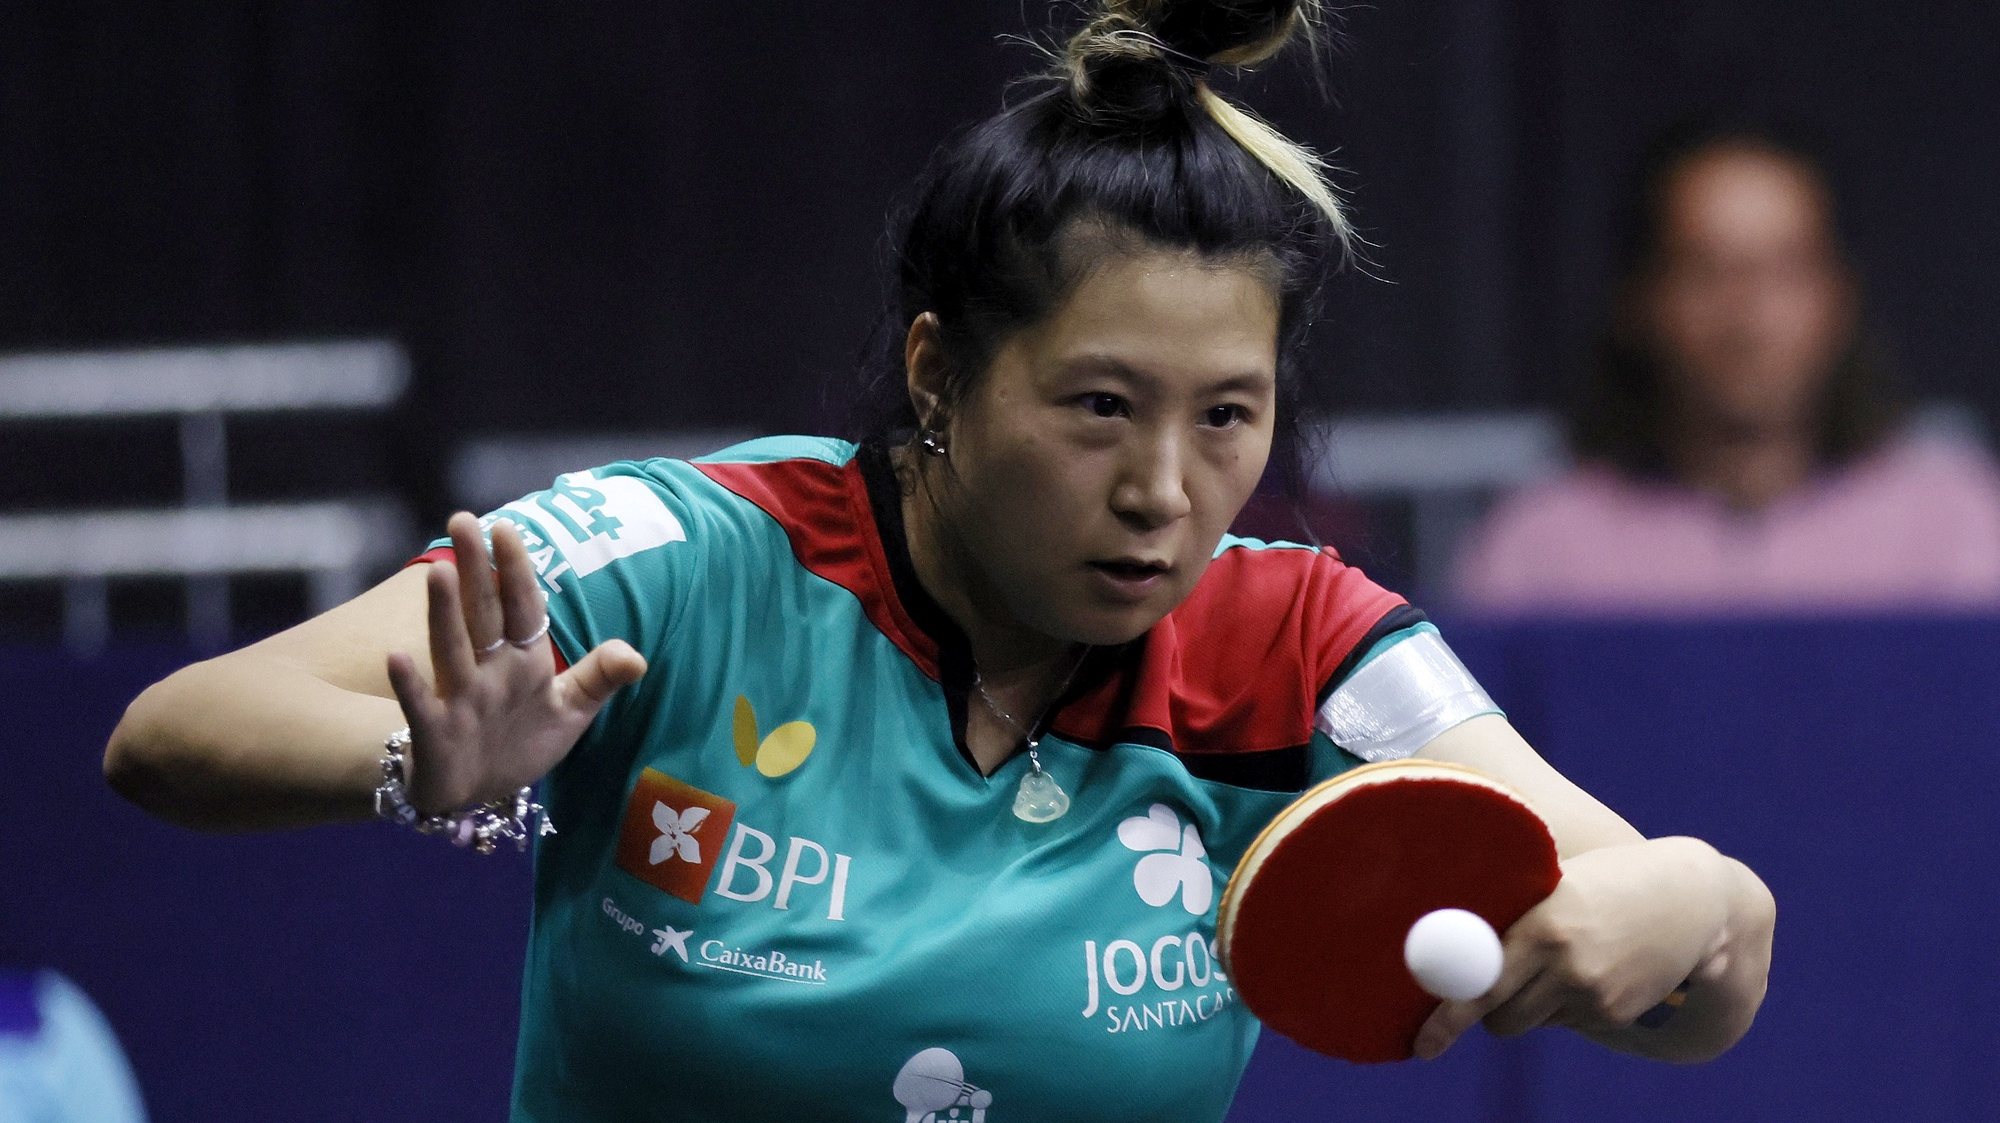 epa10129402 Jieni Shao of Portugal competes against Xiaona Shan of Germany during their table tennis Women’s Singles quarterfinal at the European Championships Munich 2022, in Munich, Germany, 19 August 2022.  EPA/RONALD WITTEK